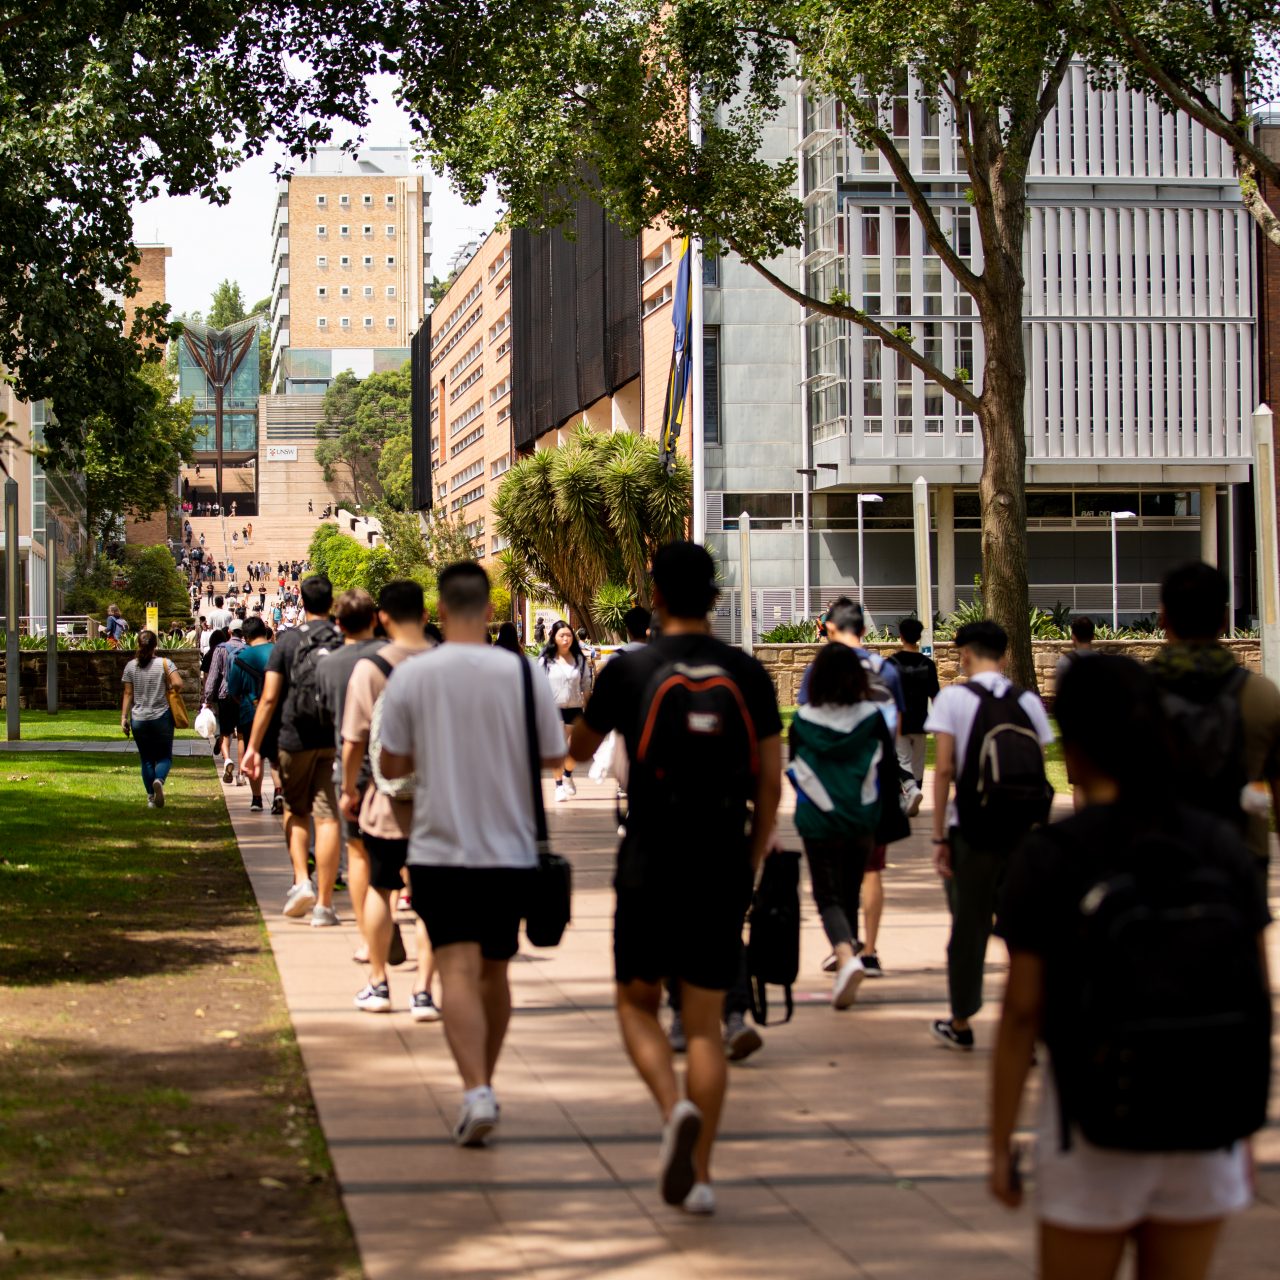 Students on Main Walkway, Scientia building in background